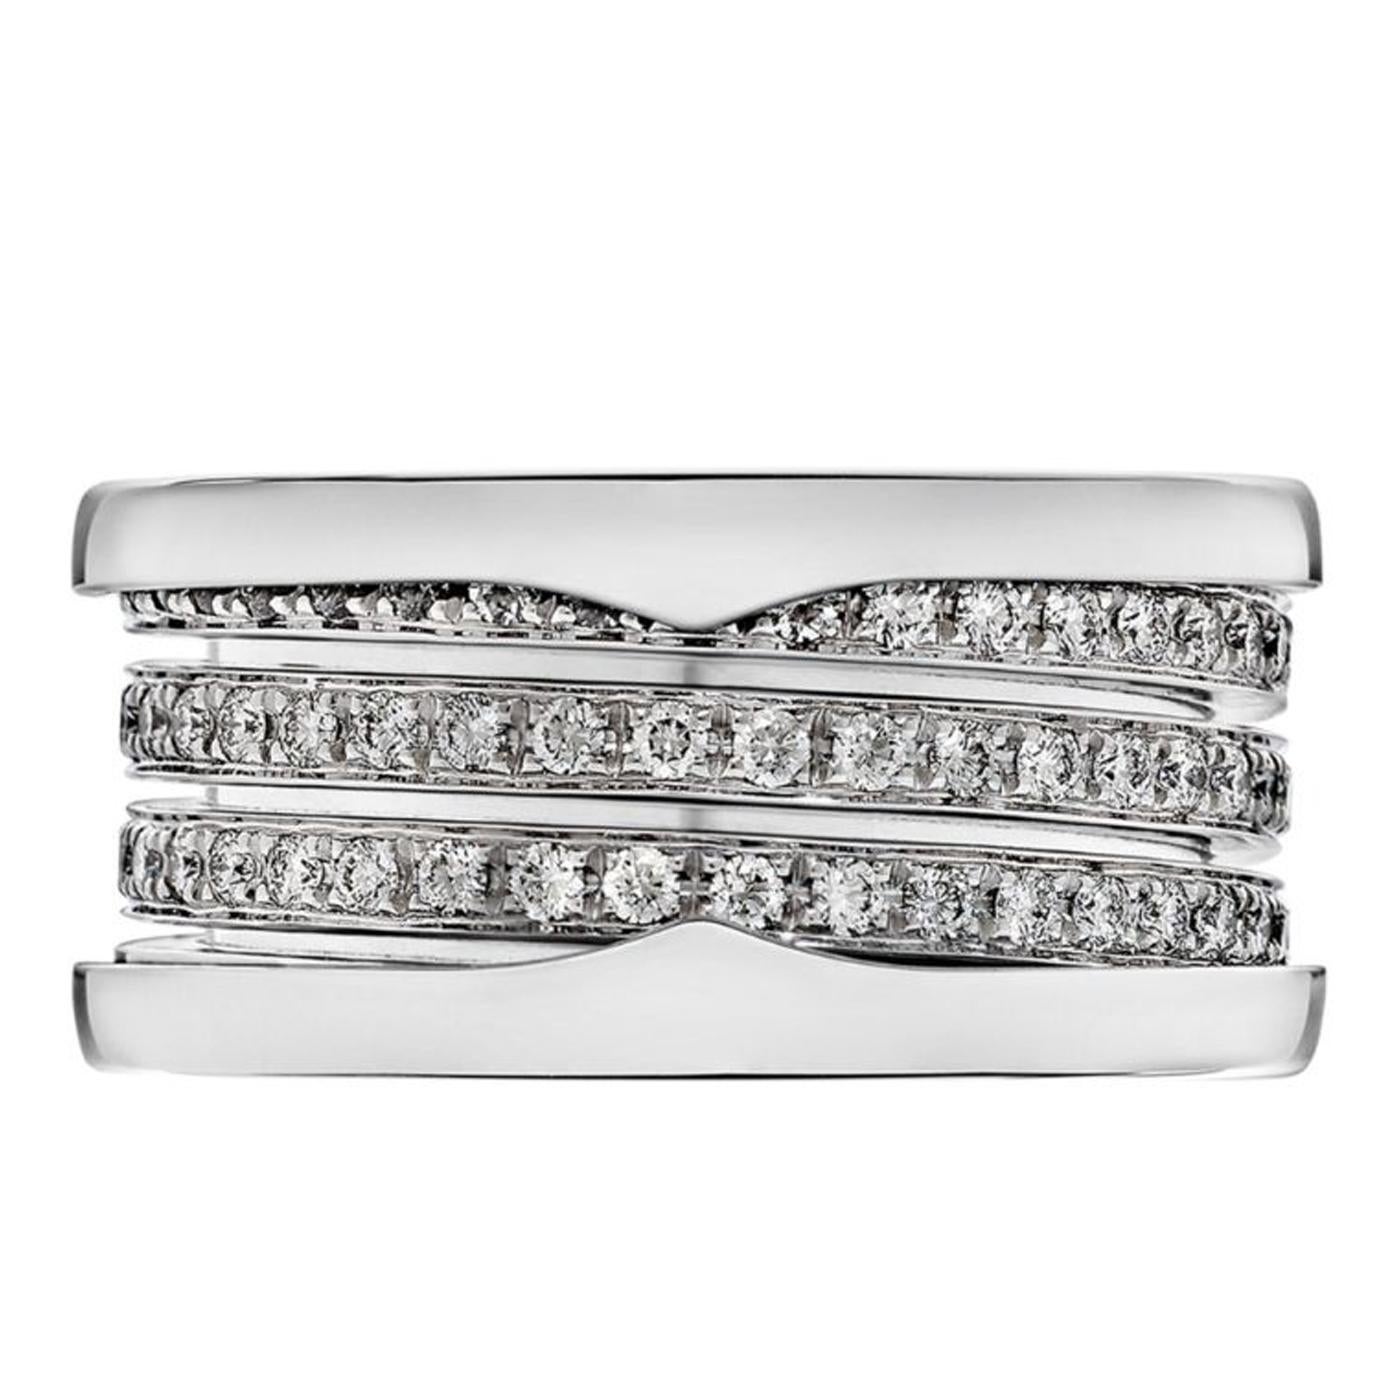 Brilliant Cut Bvlgari B.Zero1 18k White Gold 4-Band Ring with Pave Diamond Trim AN850556 For Sale